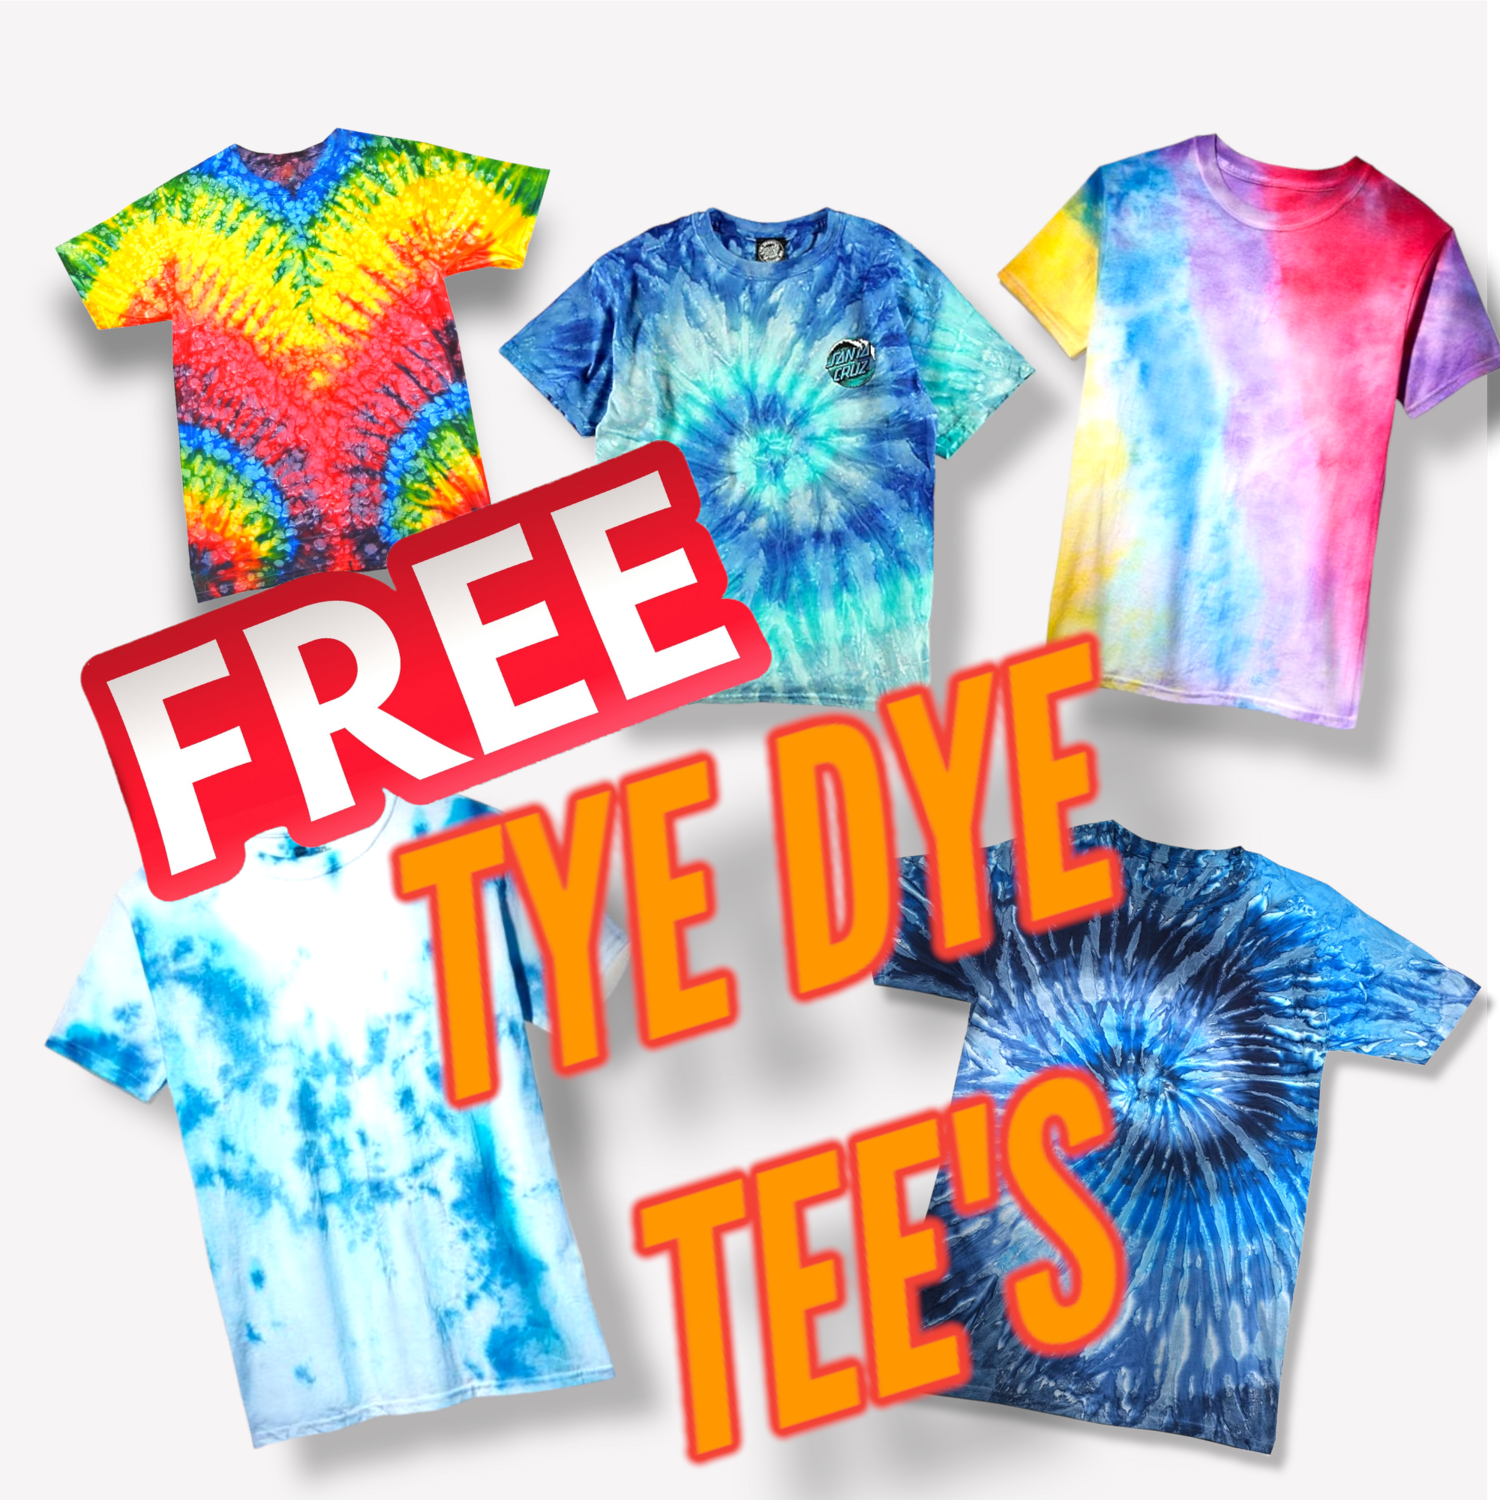 Free tee tye dye 
Only small to large